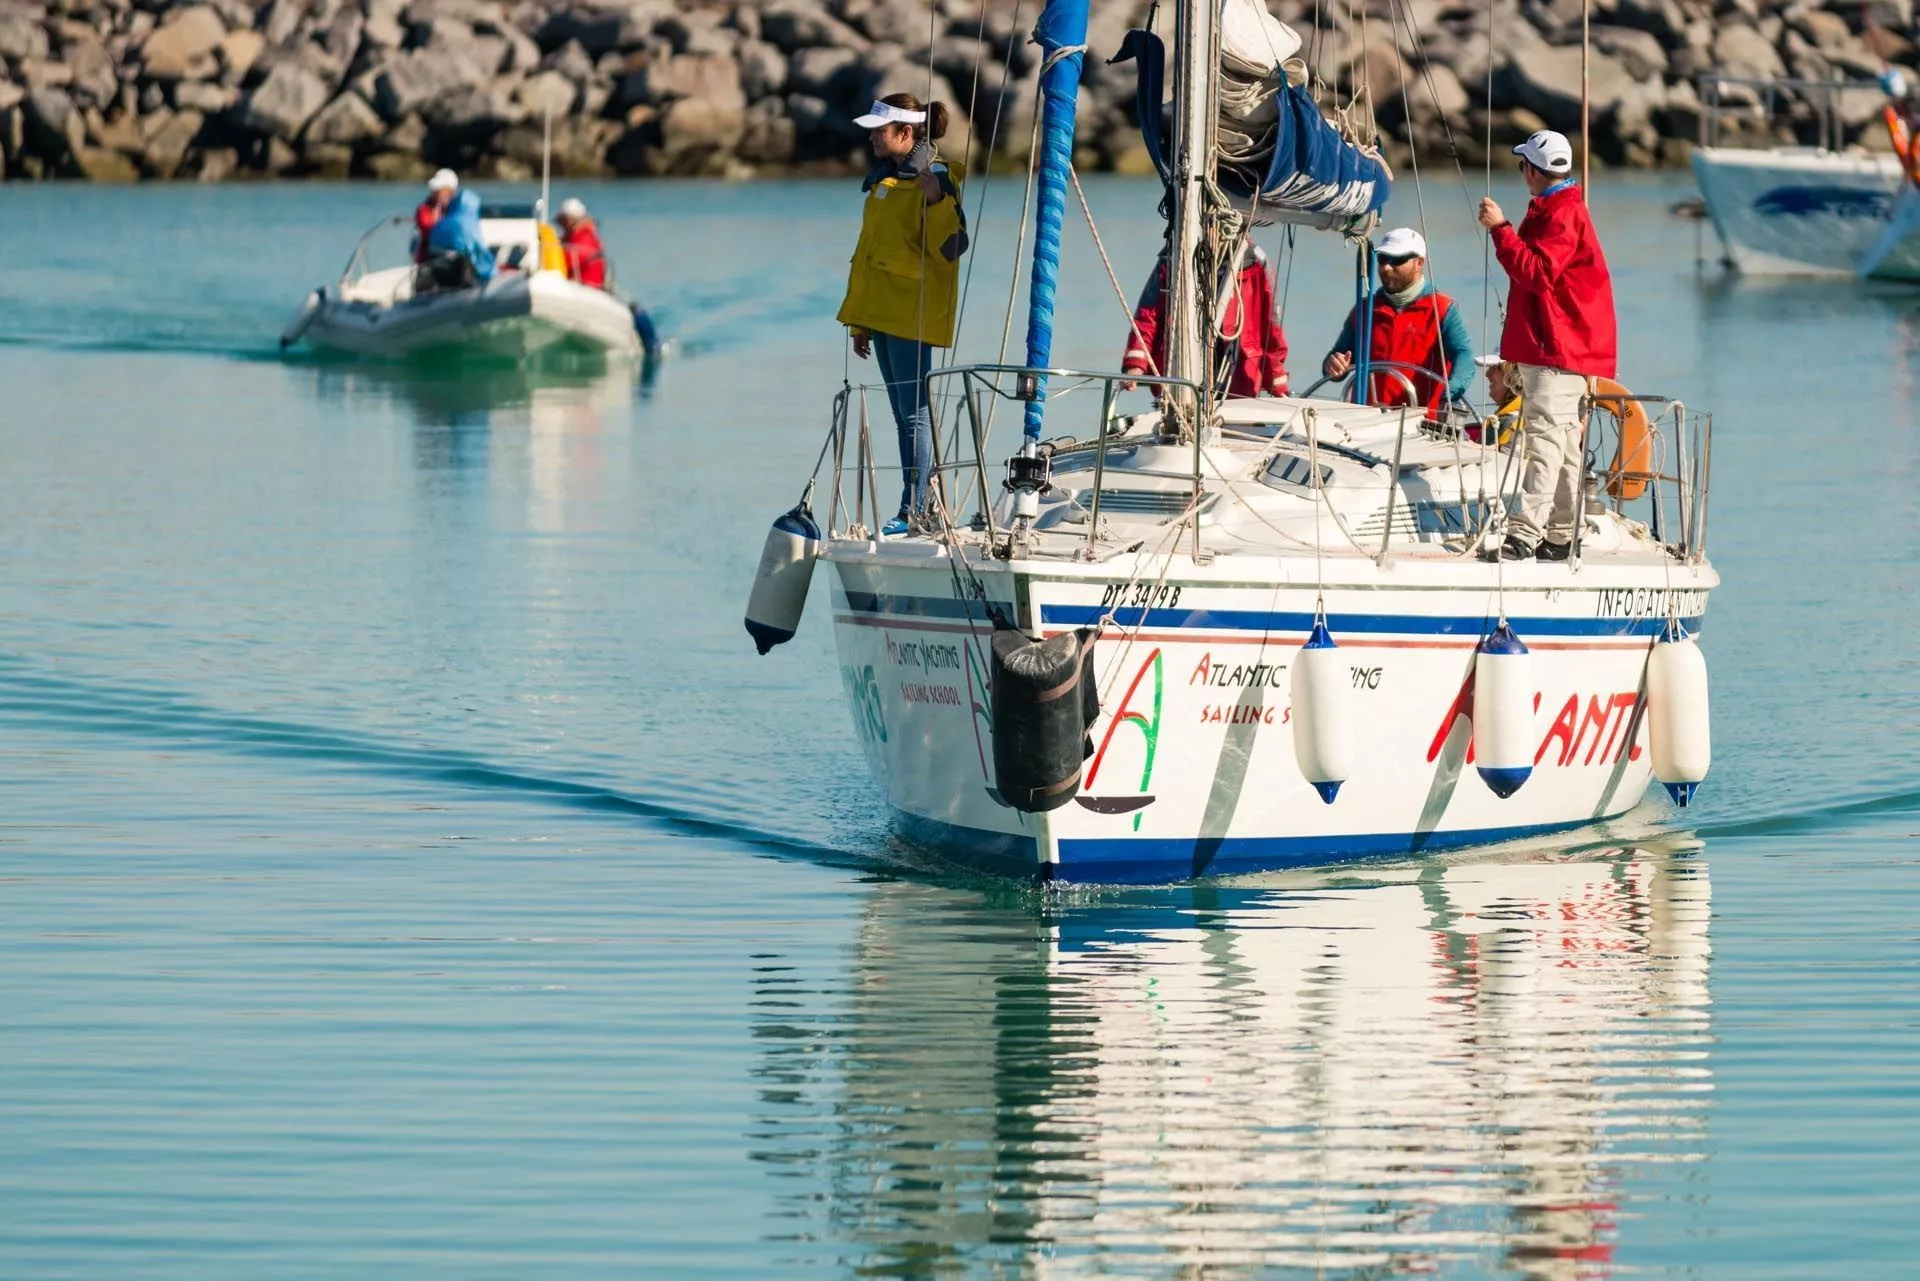 Atlantic Yachting Sailing School in South Africa, Africa | Yachting - Rated 0.9